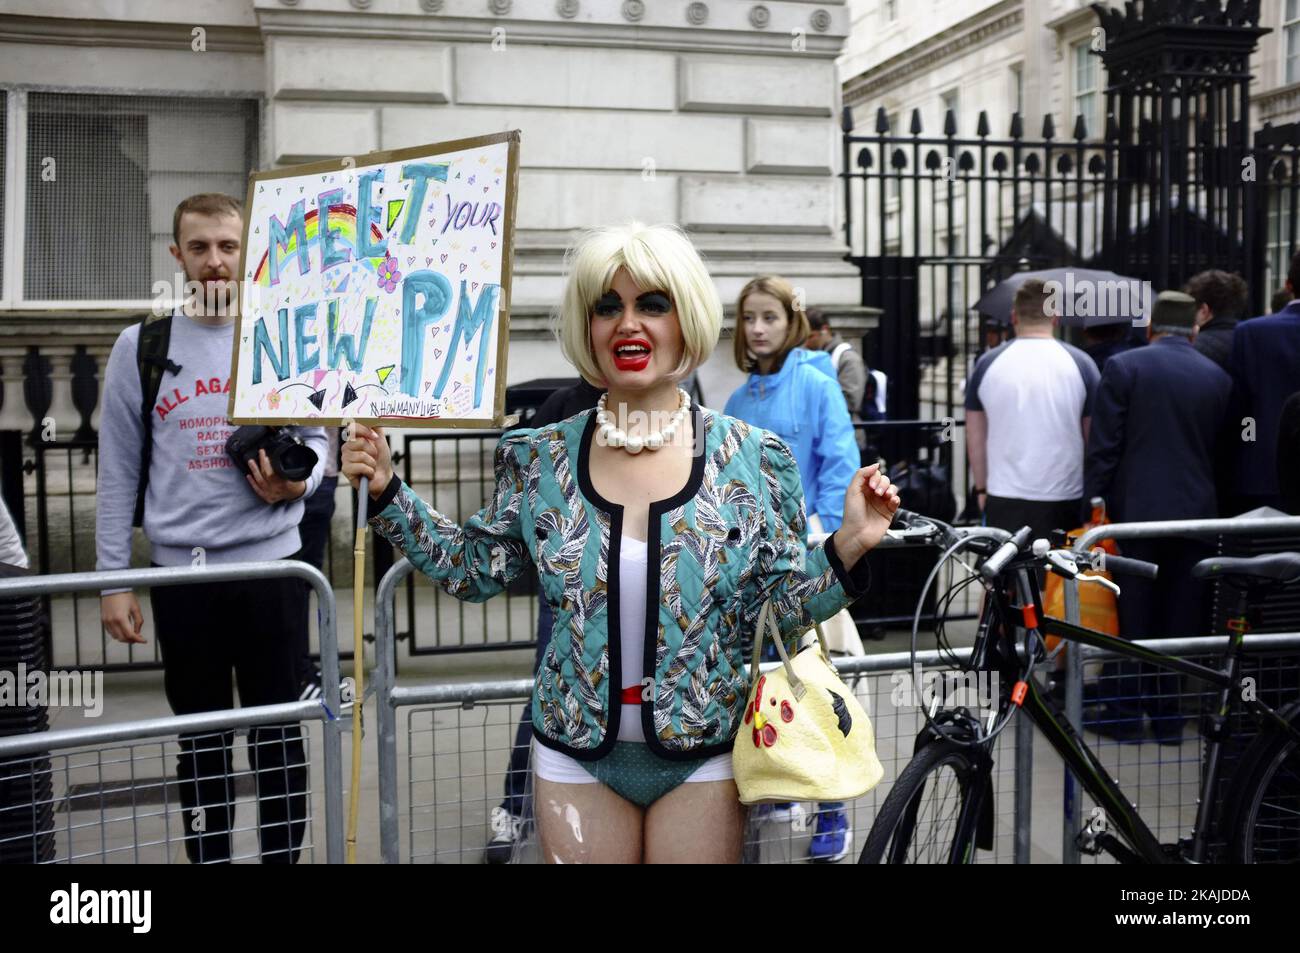 On the day that the new Conservative Party leader Theresa May MP became Prime Minister of the UK, protesters humorously dressed up in face masks and singing amusing political songs mocking the PM outside Downing Street on 13th July 2016 in London, England United Kingdom. The leader of the protest dressed up as a joke Theresa May with blonde wig, crudely put on make up, see through plastic dress and wearing pearls, delighted passers by. (Photo by Jay Shaw Baker/NurPhoto) *** Please Use Credit from Credit Field *** Stock Photo